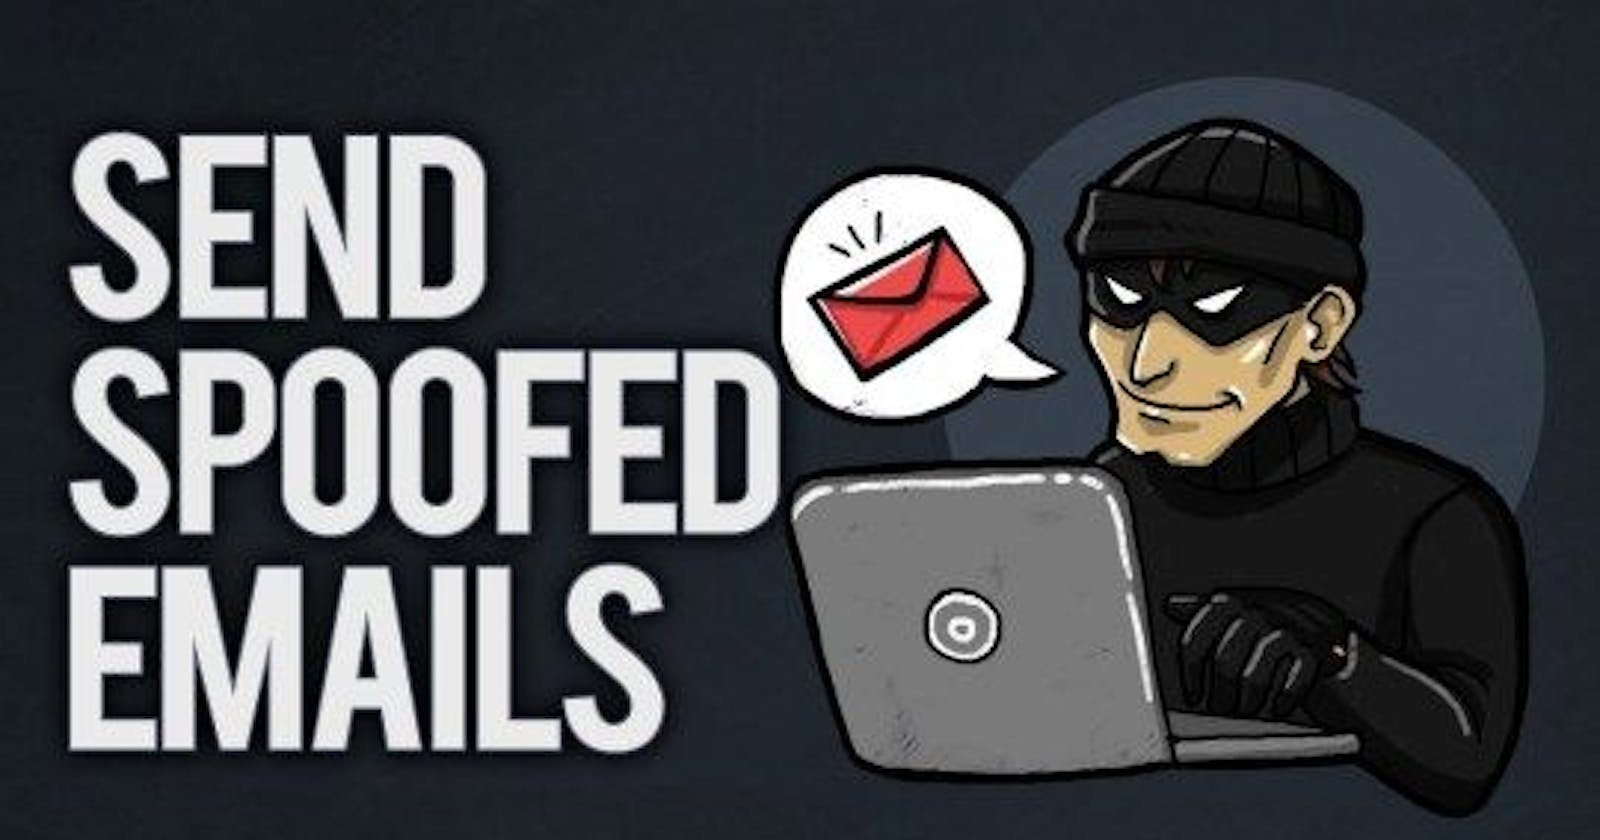 Sending Spoofed Emails from Linux: A Step-by-Step Tutorial